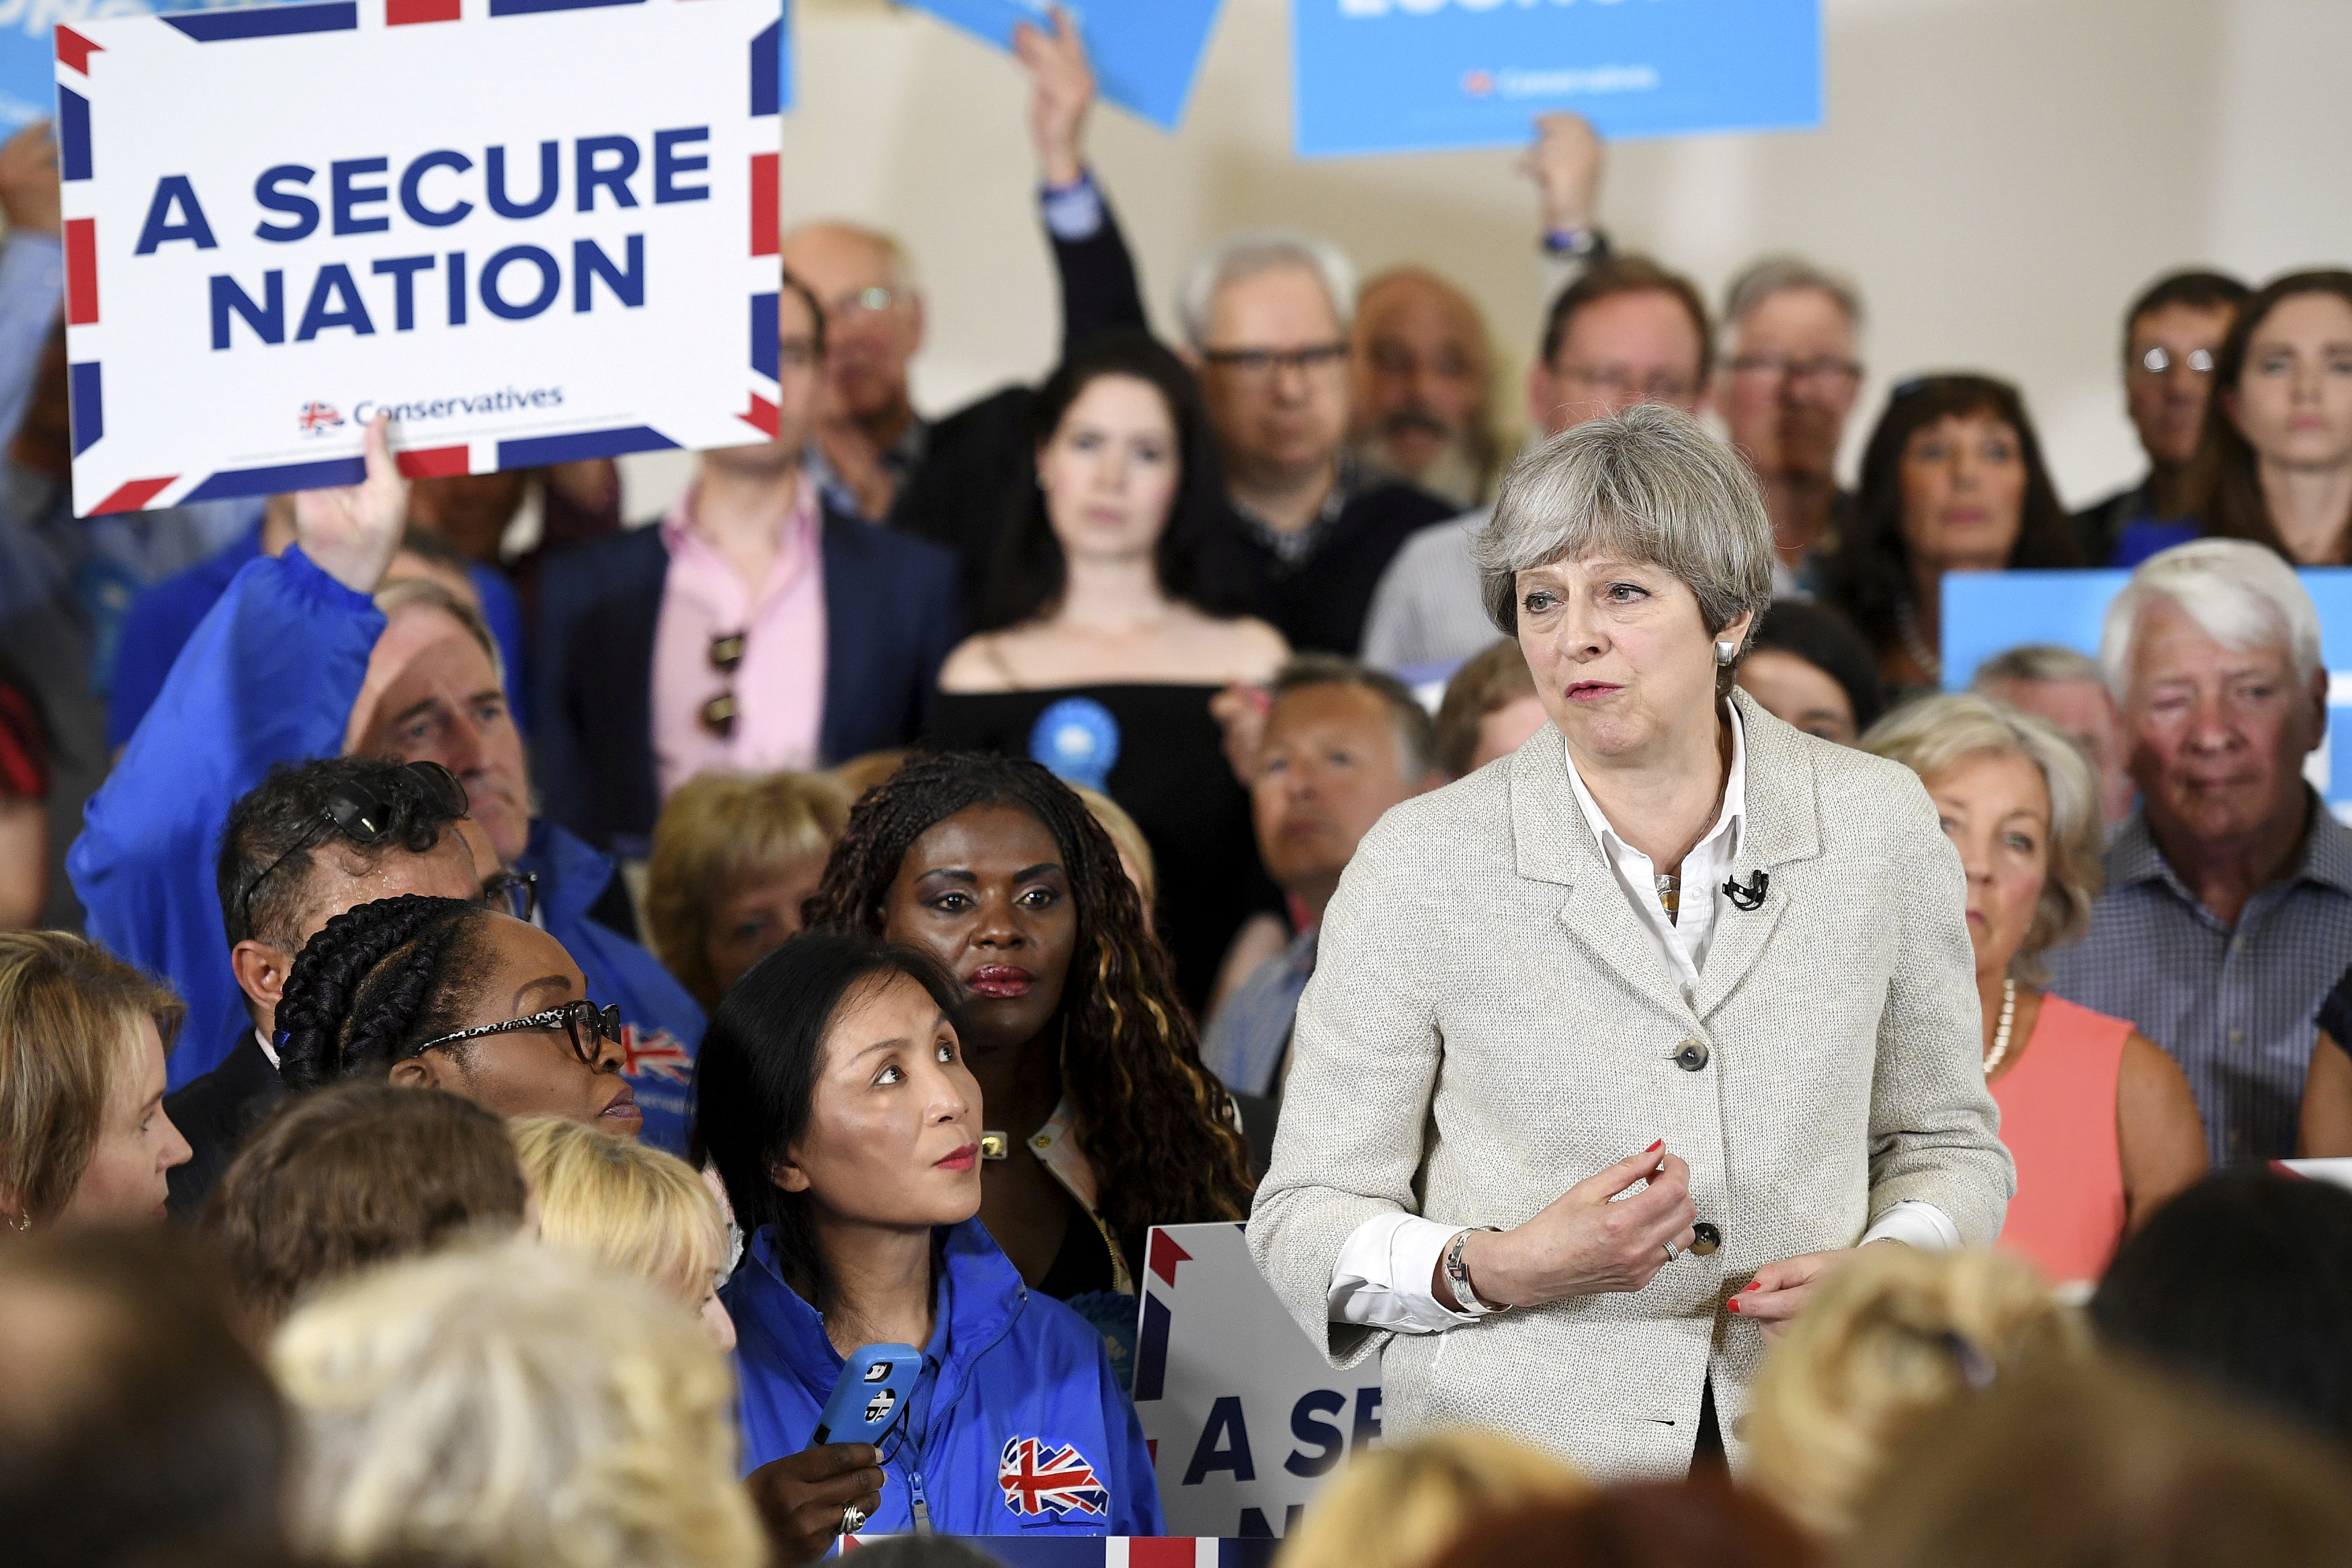 From landslide to upset defeat - scenarios for May's UK election